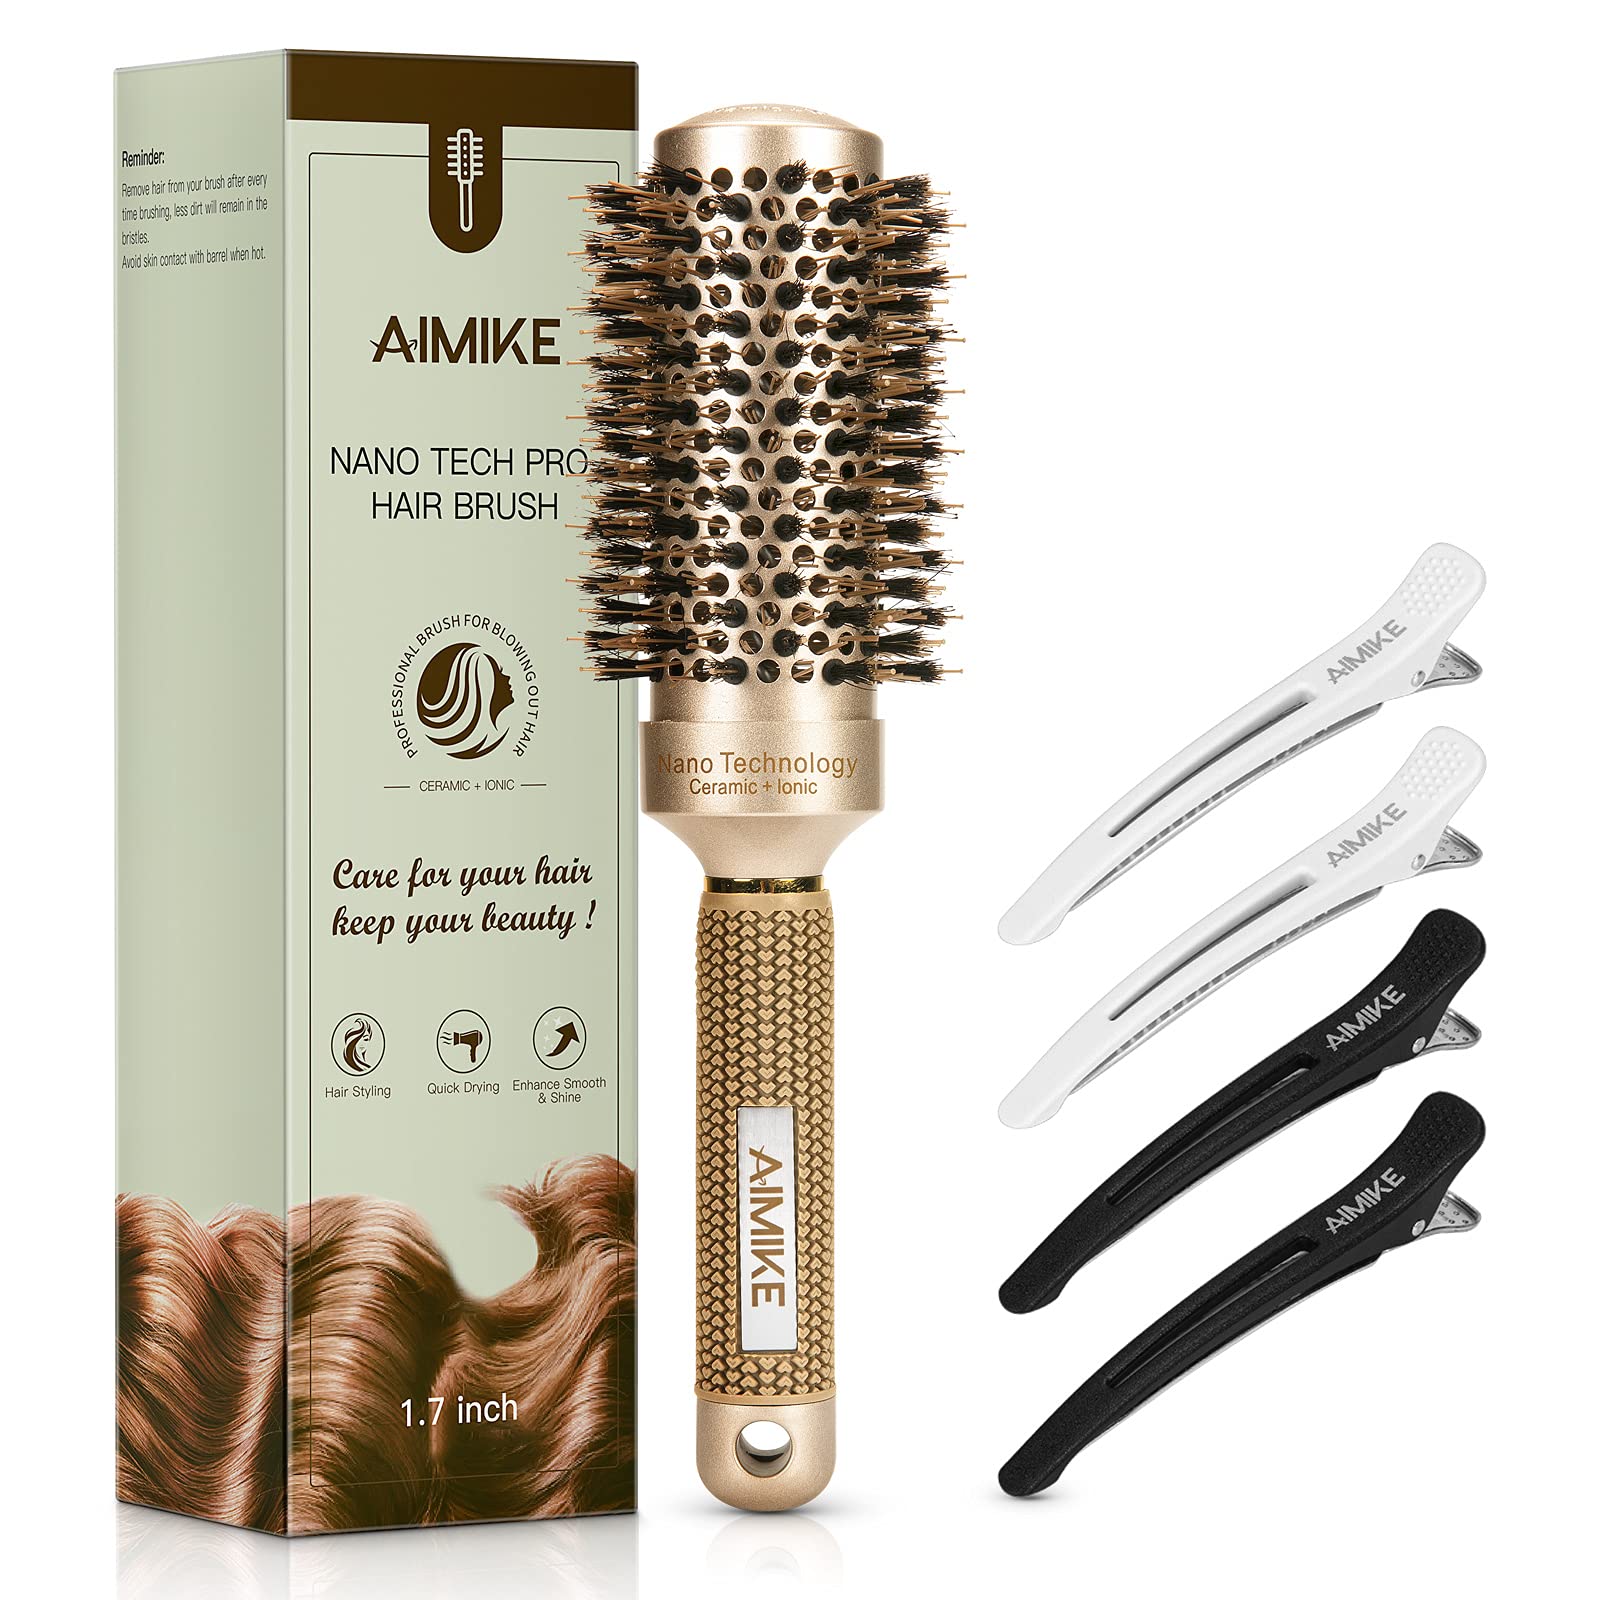 AIMIKE Round Brush for Women, Nano Thermal Ceramic and Ionic Tech Hair  Brush, Medium Round Brush with Boar Bristles for Blow Drying, Styling,  Curling, Increase Hair Shine (Barrel '') + 4 Hair Clips  Inch